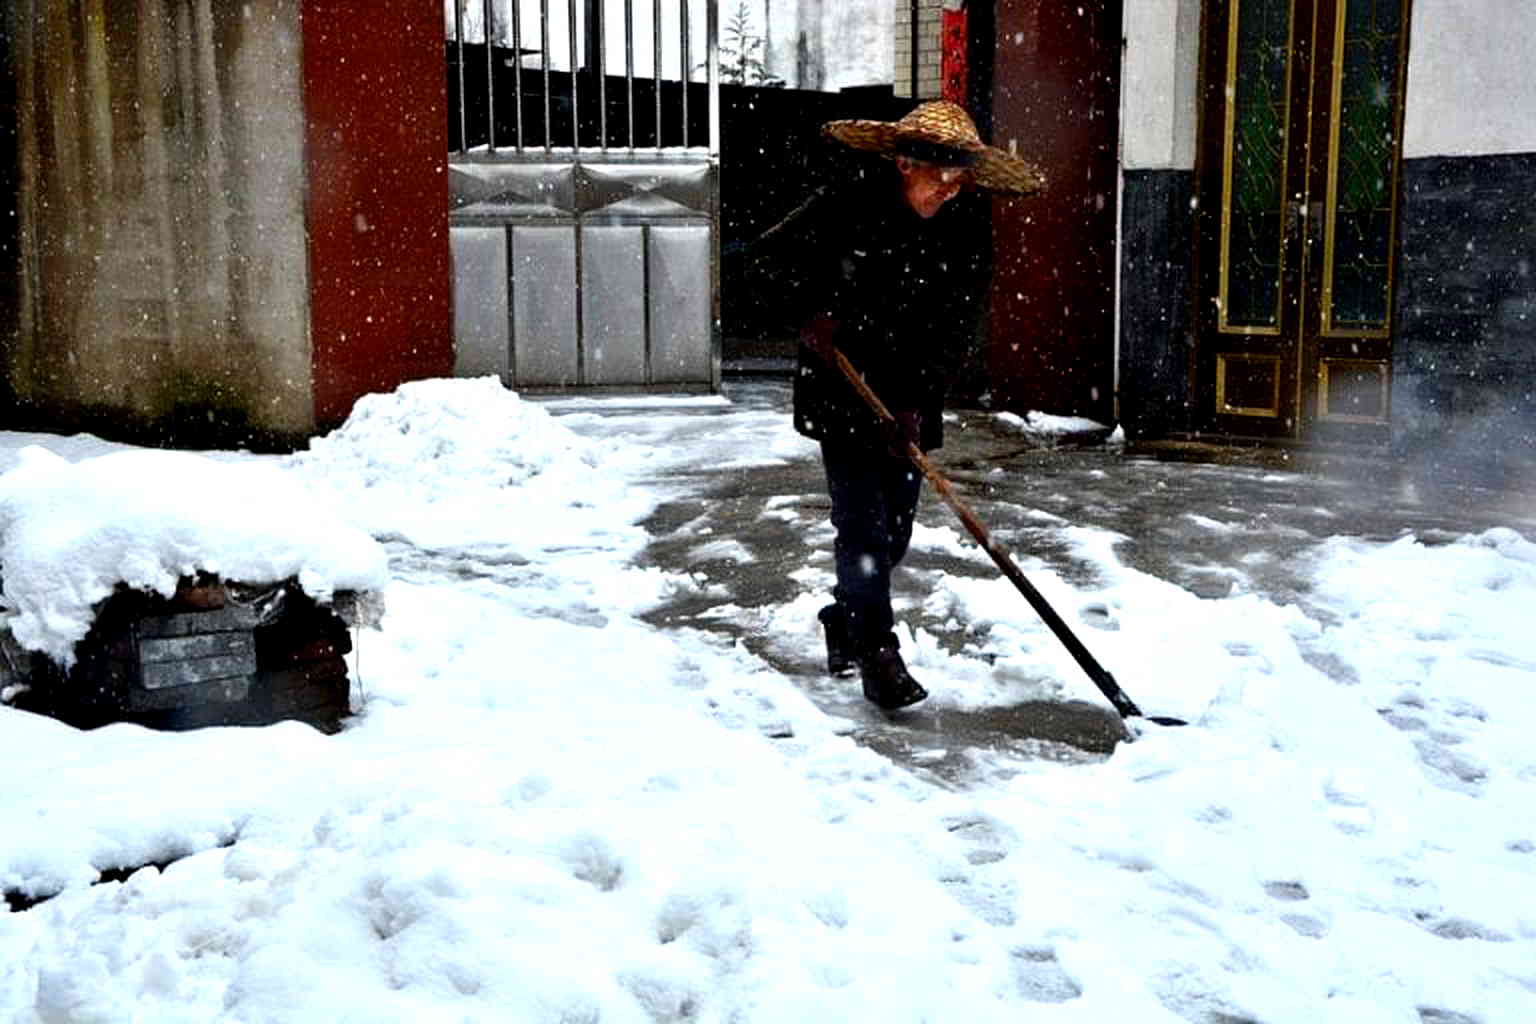 China Bans Coal Burning, Forcing Many to Freeze This Winter